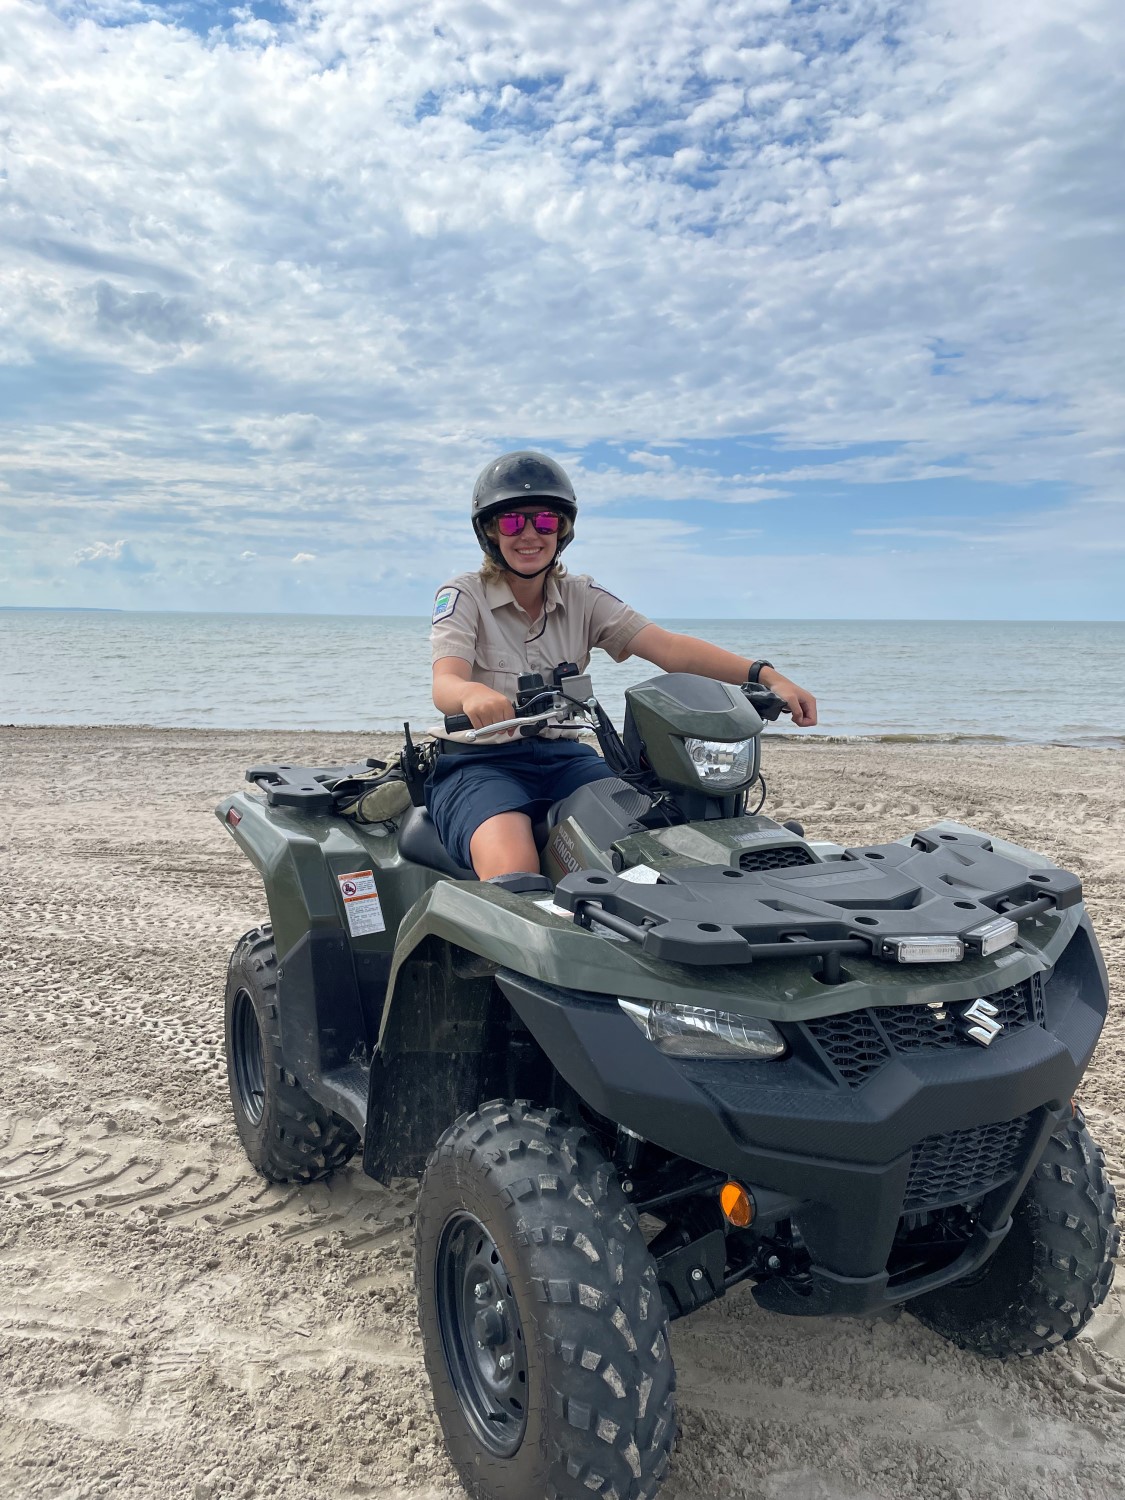 A Park employee wearing a helmet and sunglasses, sitting on an ATV with both hands on the handles. The ATV is parked on a beach with the water and a blue sky behind it.